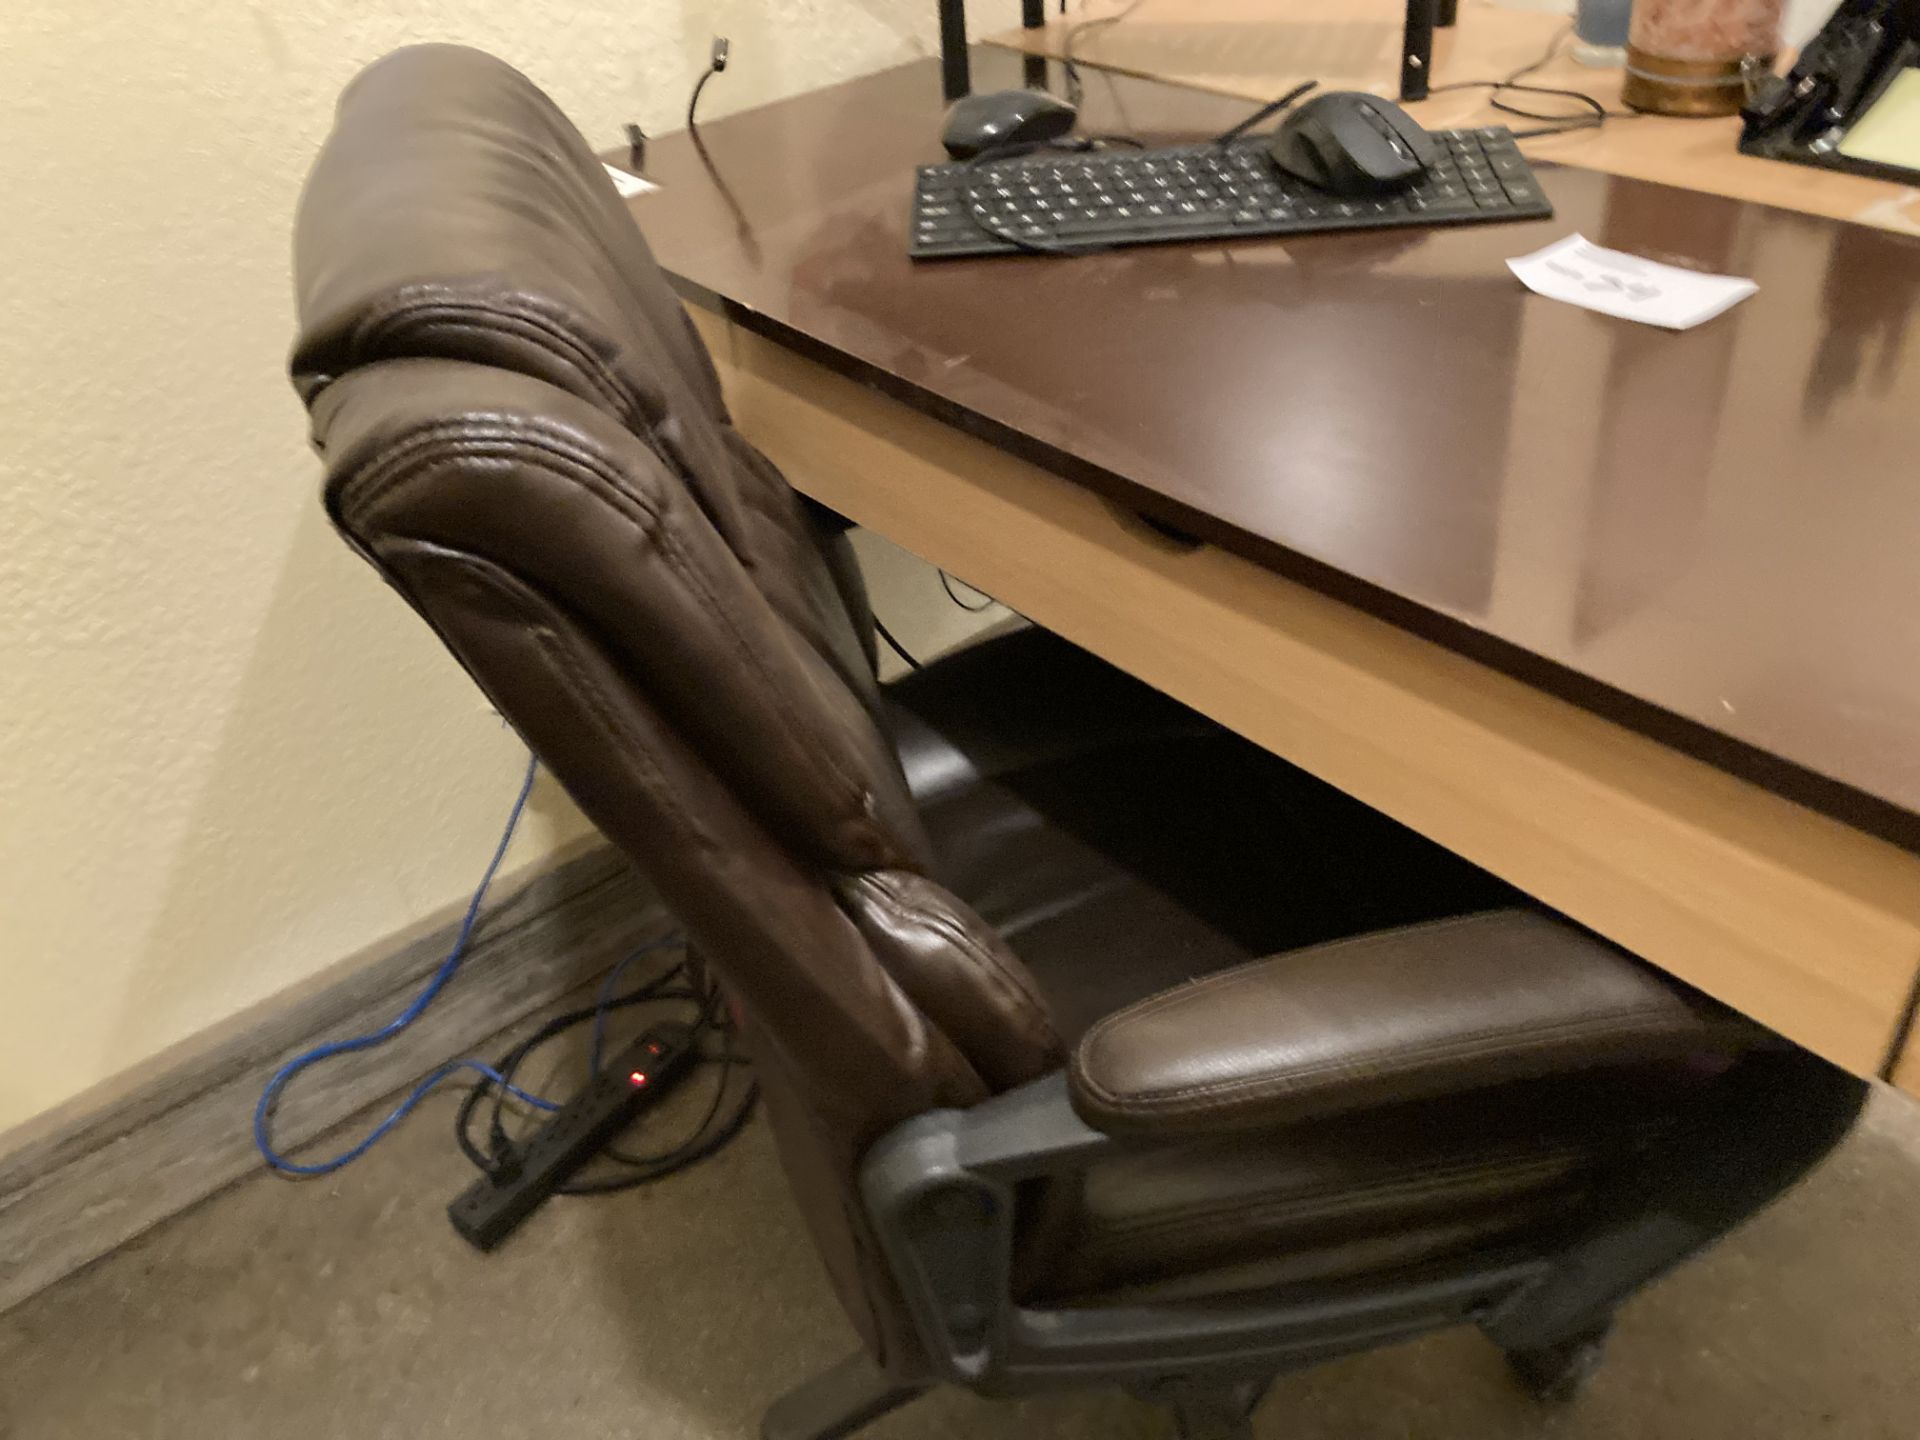 LOT OF: (1) Wood desk, (1) Acer monitor, and (1) chair, with contents - Image 3 of 4